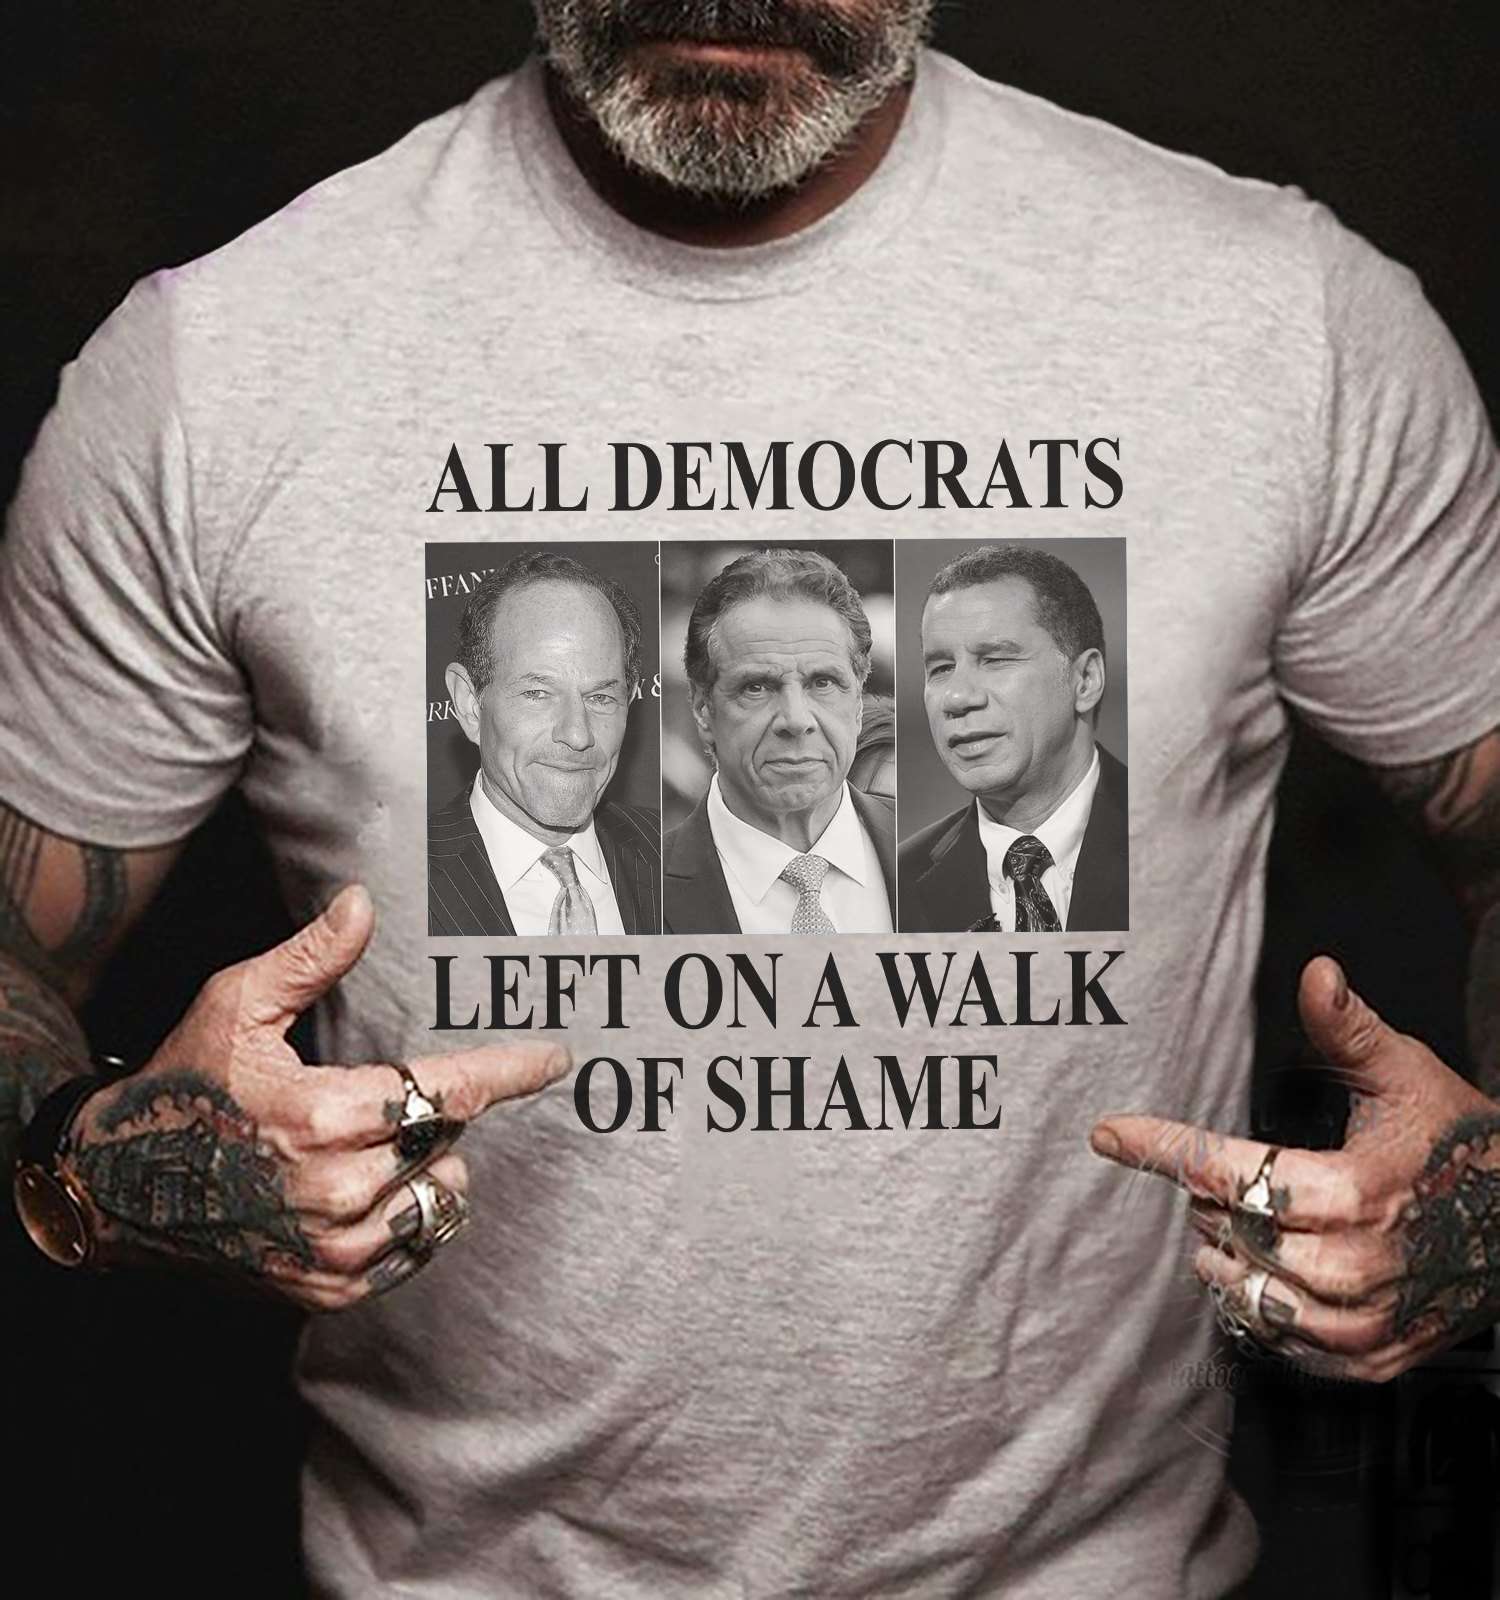 All Democrats left on a walk of shame - Andrew Cuomo, Eliot Spitzer, David Paterson